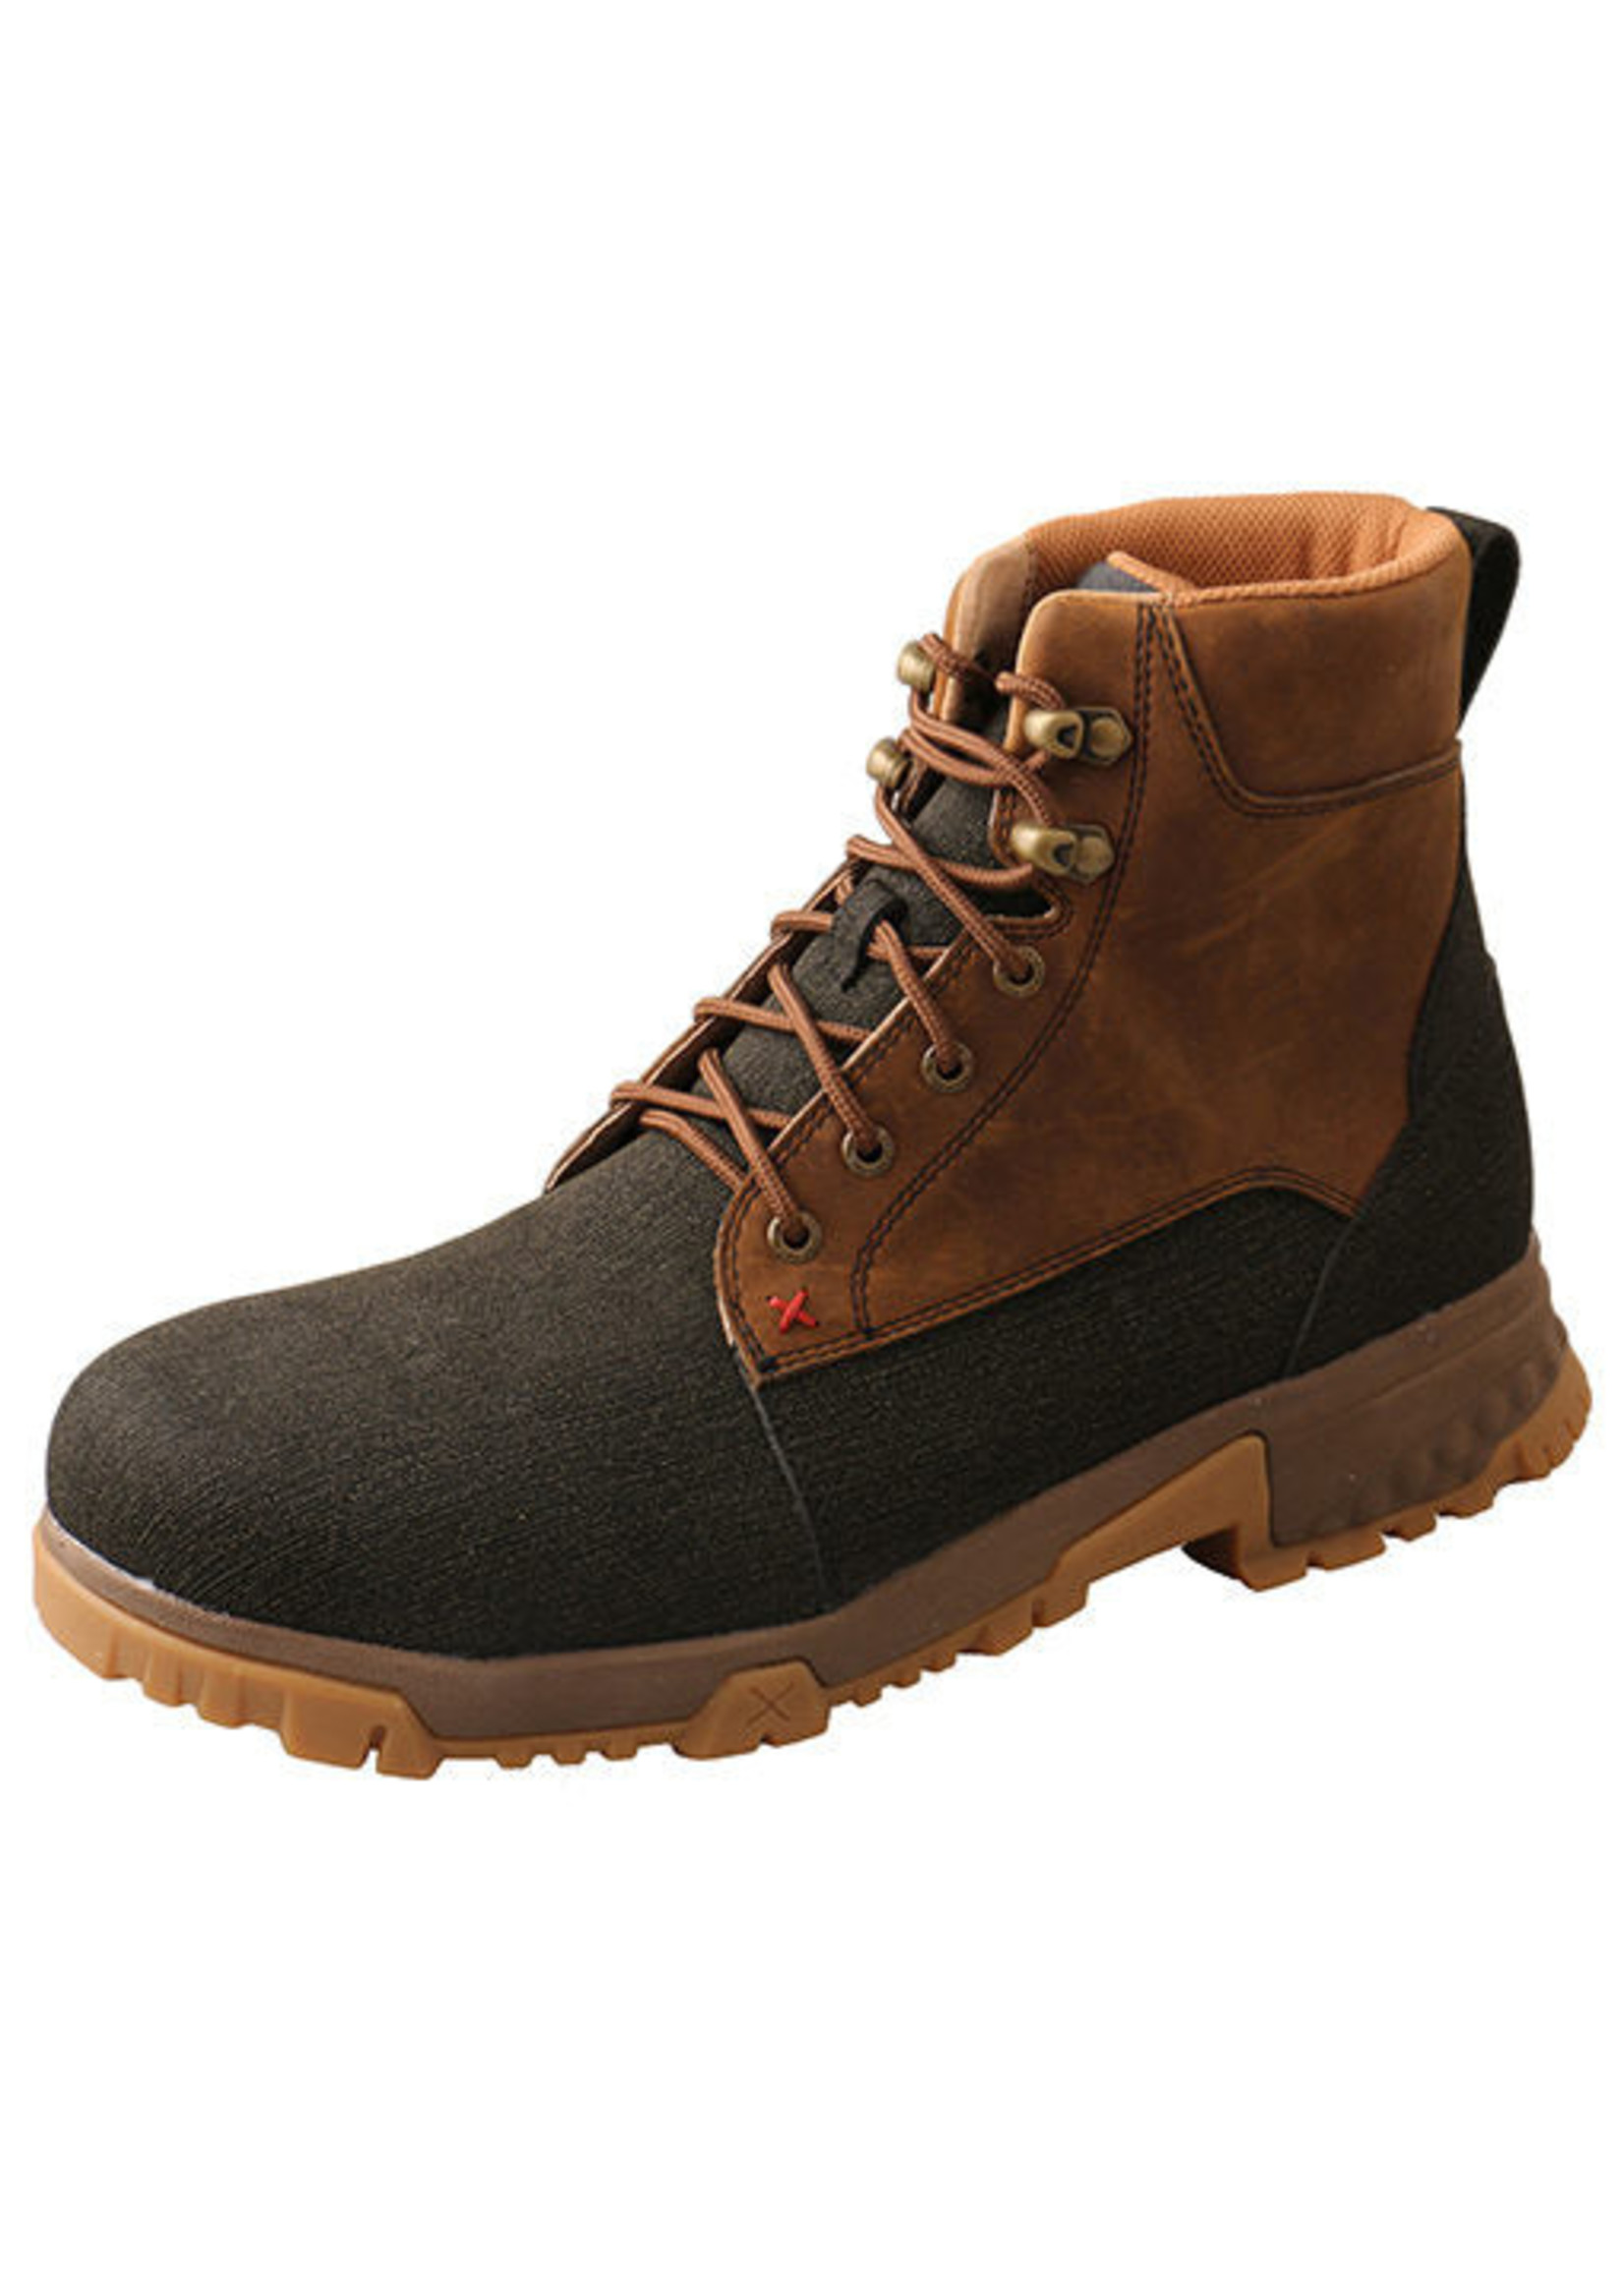 Twisted X Twisted X Men's Cellstretch Work Boot Alloy Toe